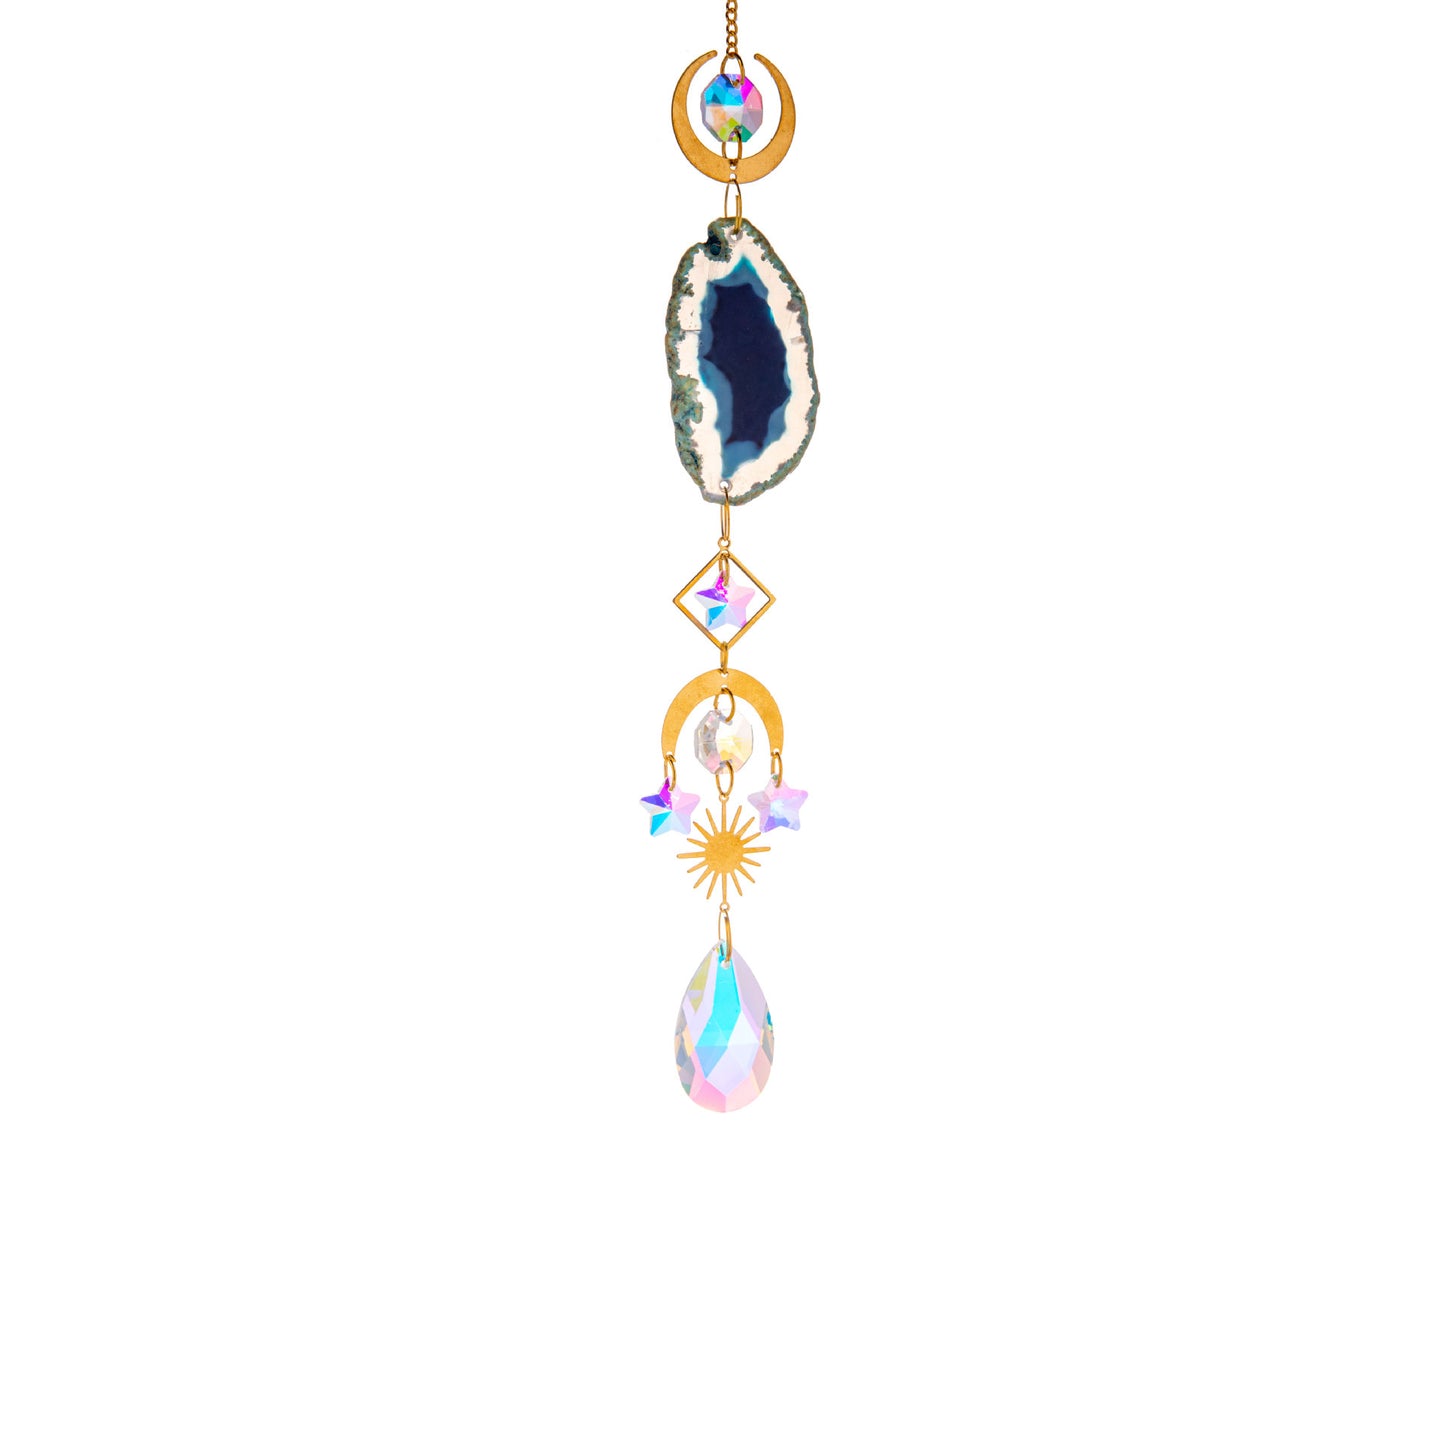 Agate Raw Stone Crystal Sun Catcher Rainbow Manufacture Hanging Window Vehicle Pendant Prism Ball